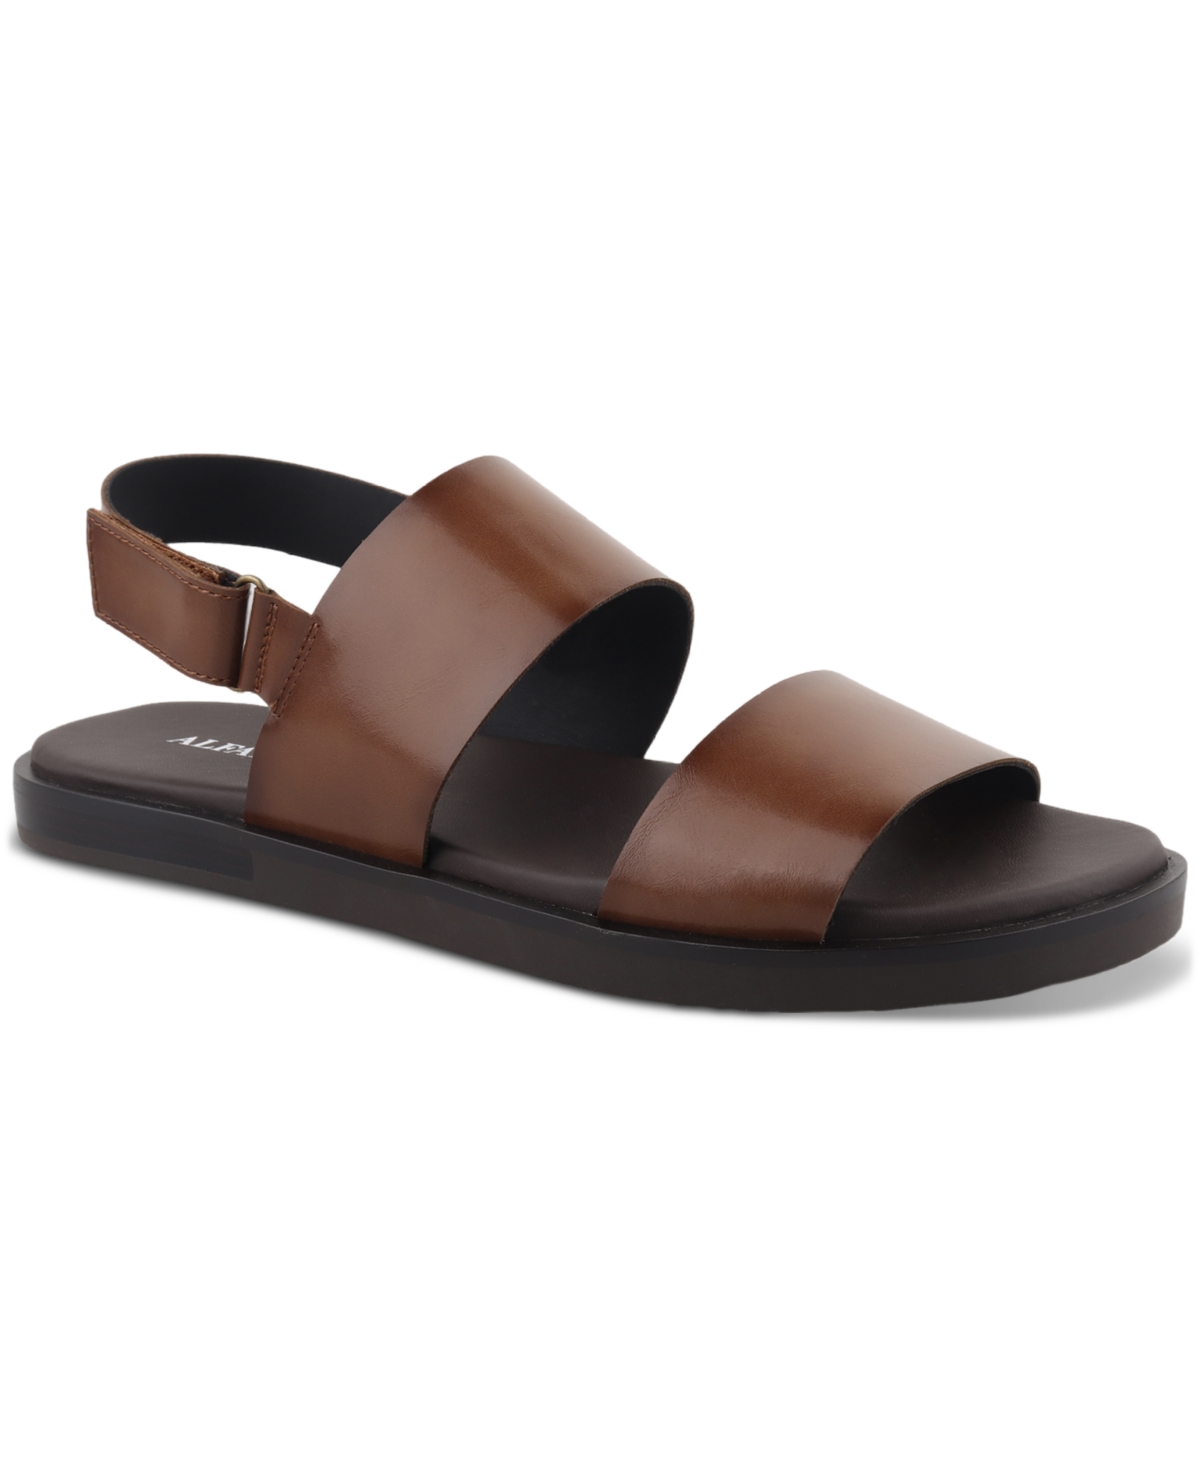 Men's Paolo Strap Sandals, Created for Macy's - Cognac